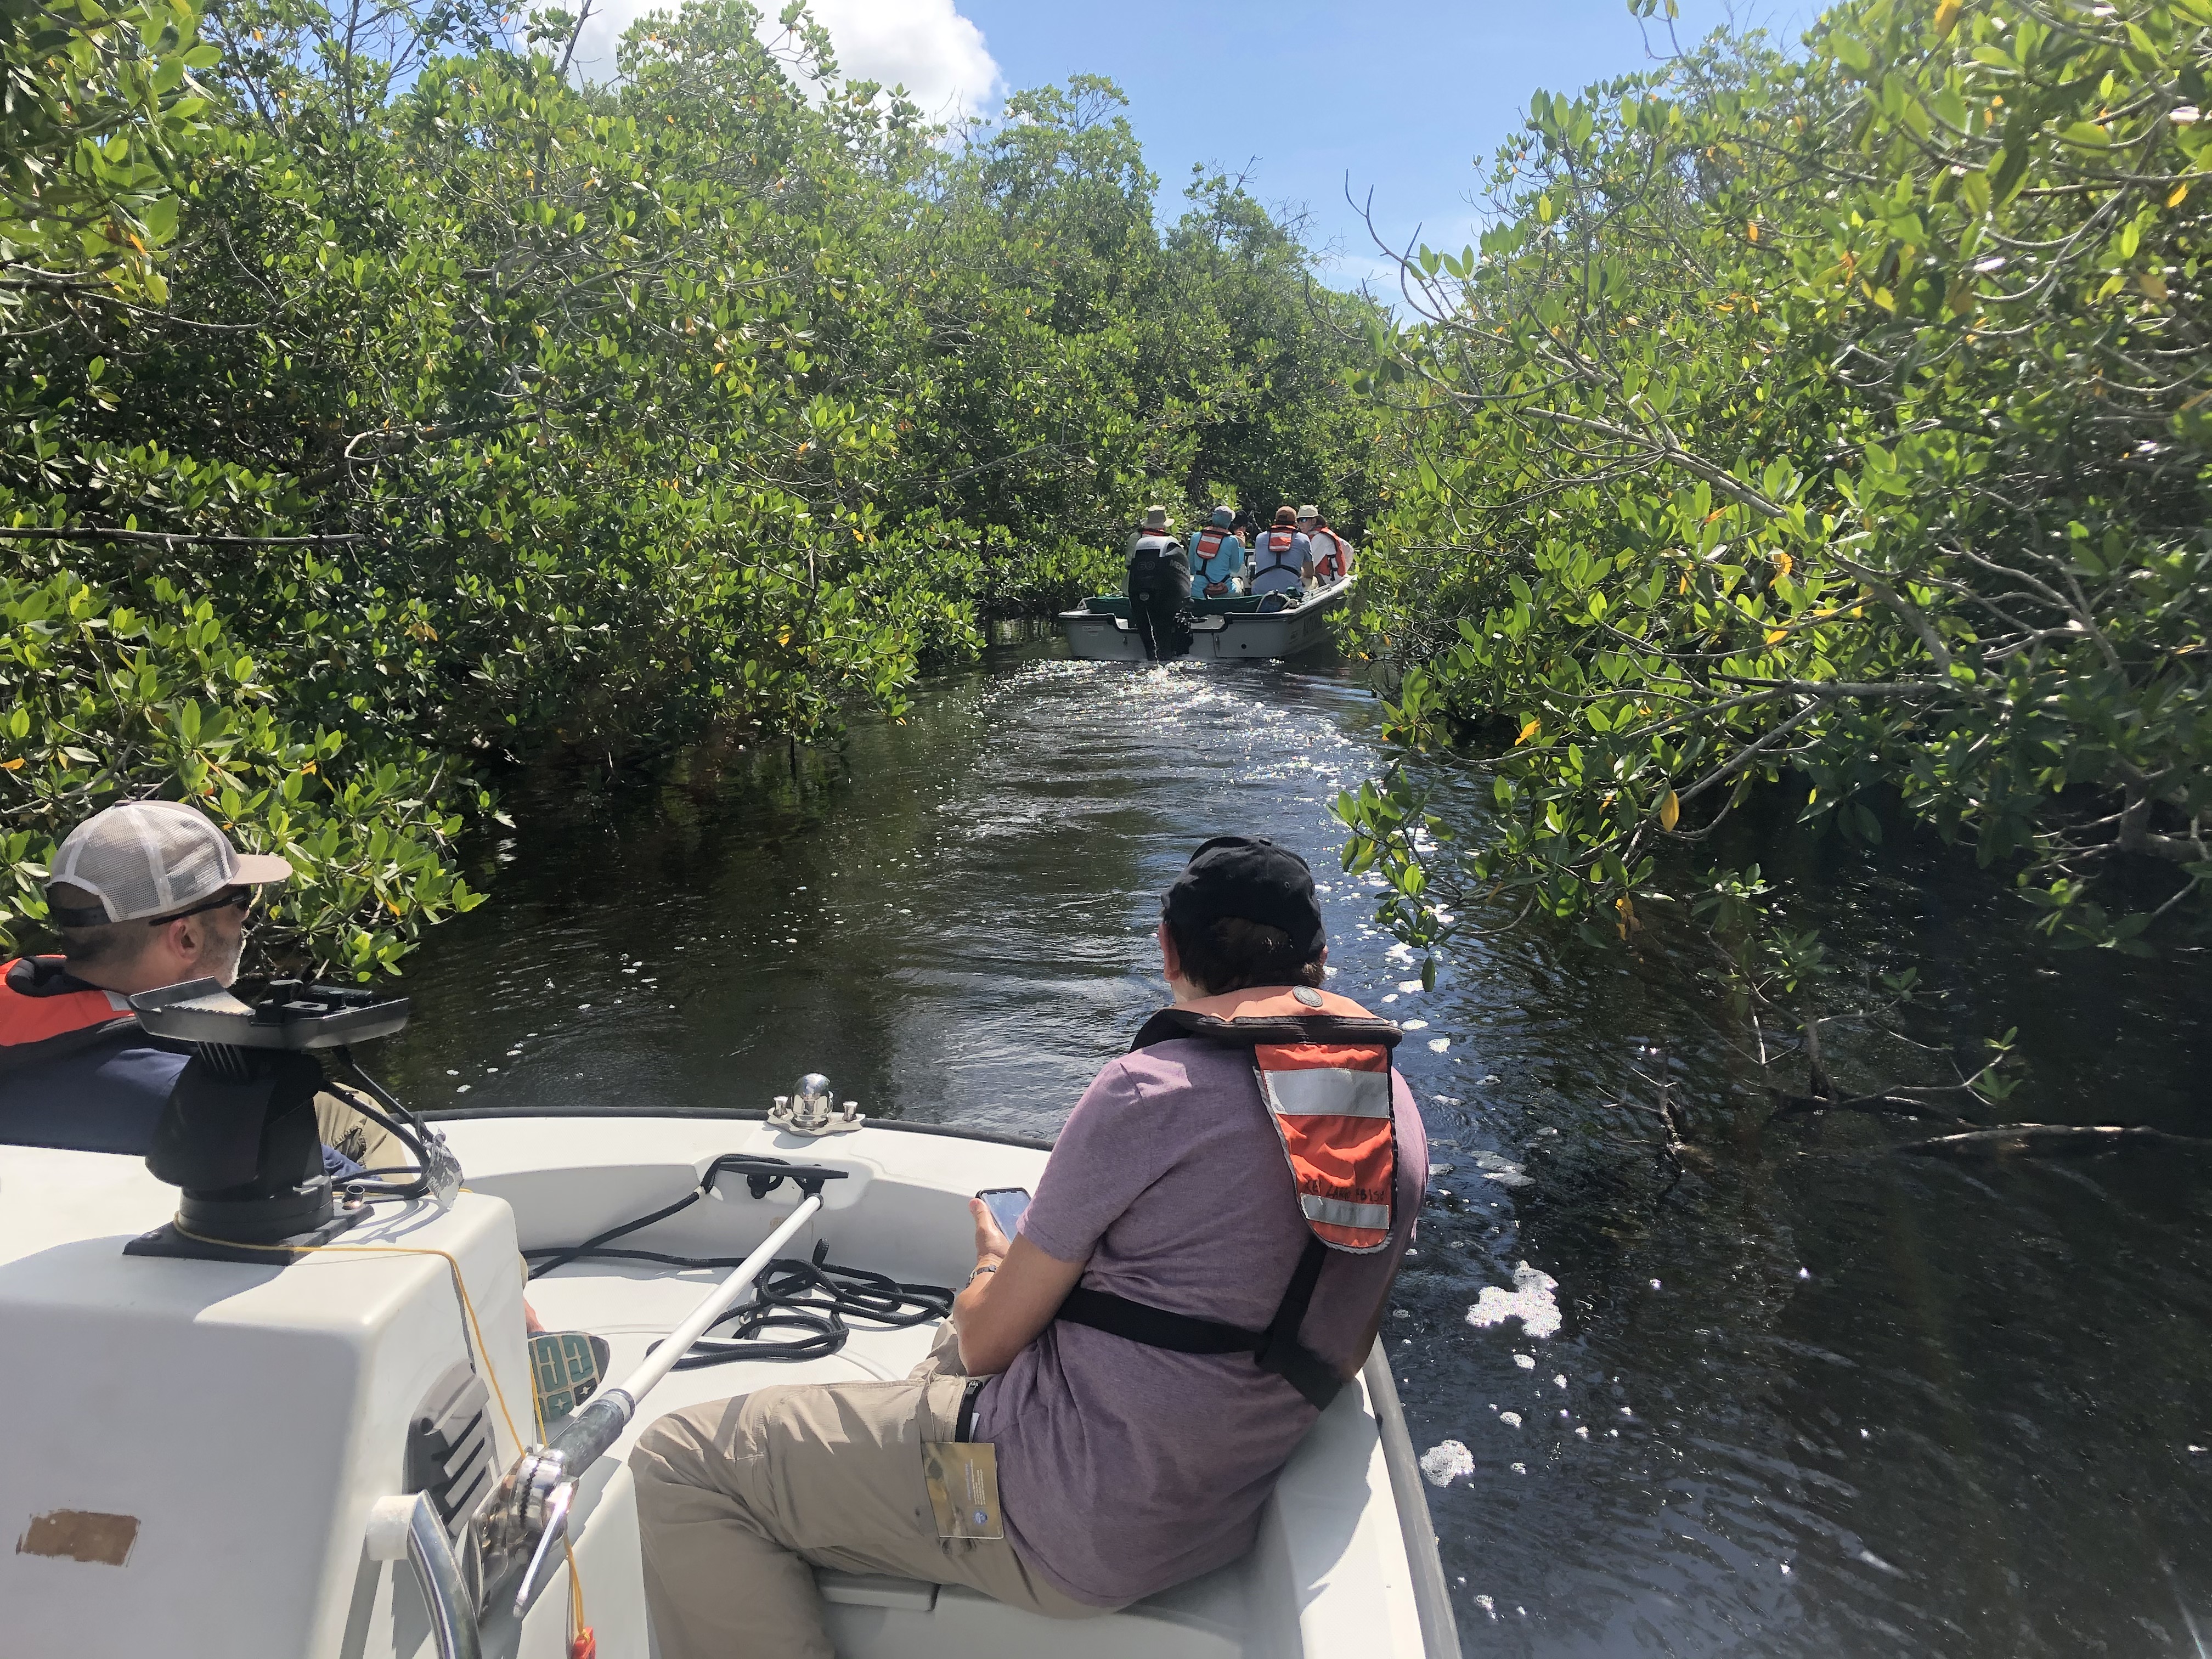 A caravan of boats taking the CISRERP committee up the Taylor River through the scrub mangrove forest to see FCE site TS/Ph 7